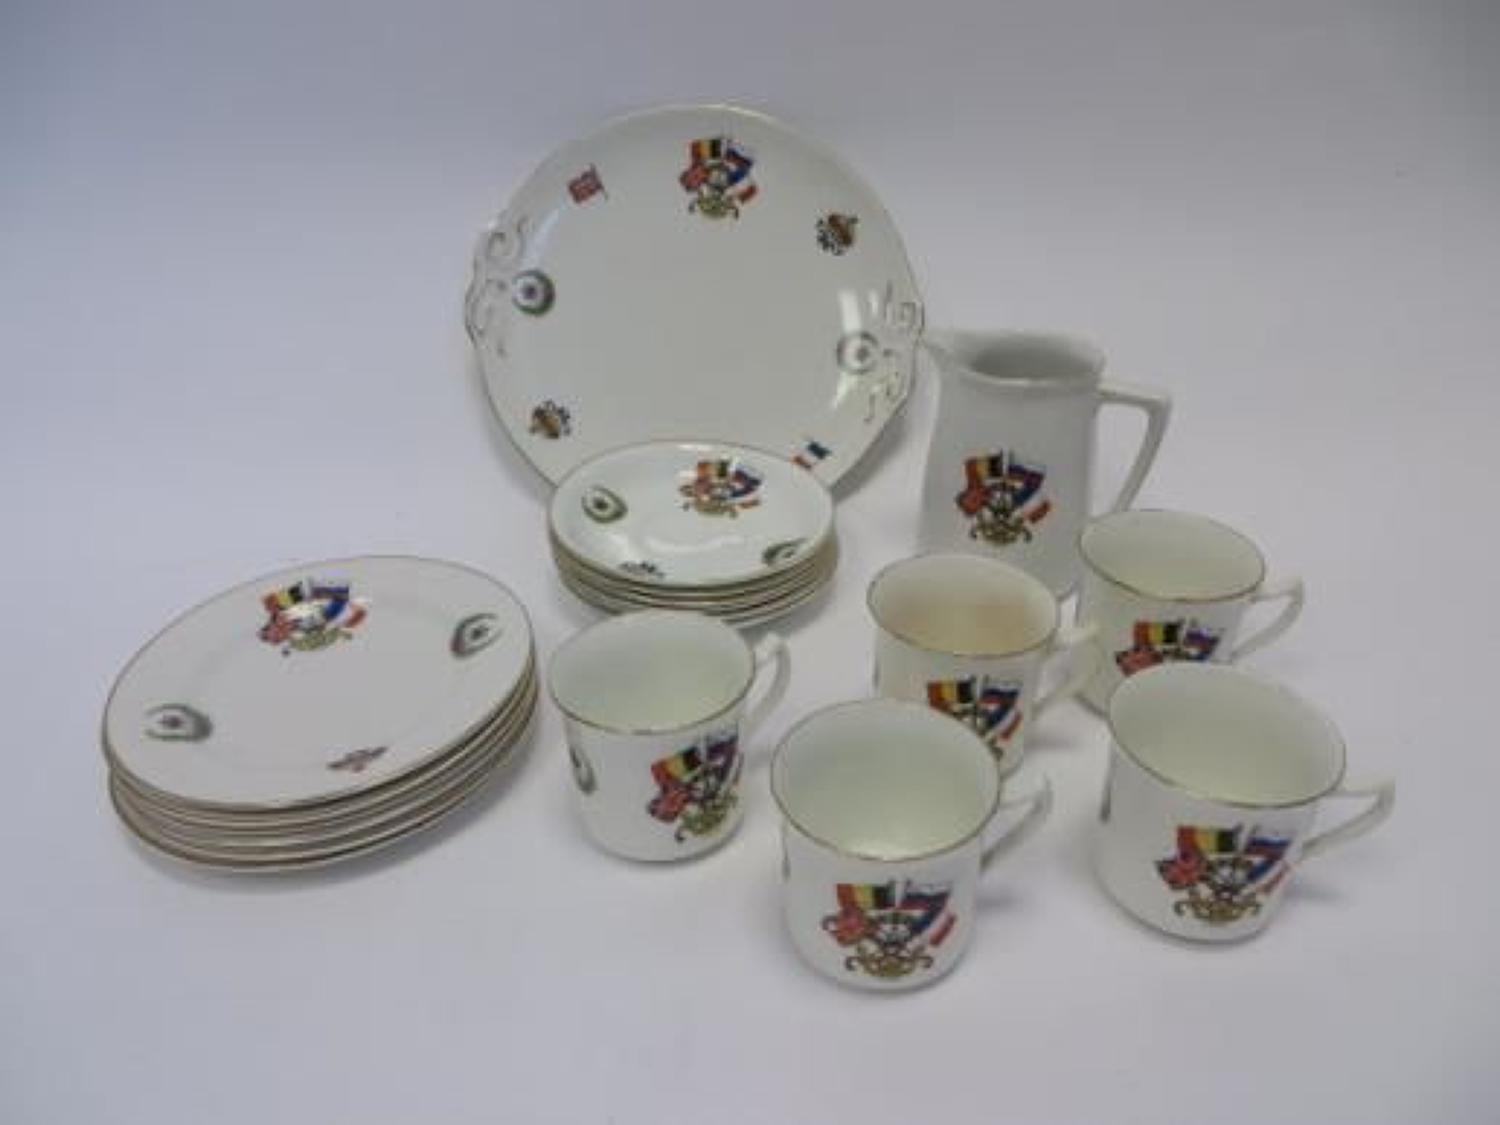 WW1 Commerative china tea service and side plates